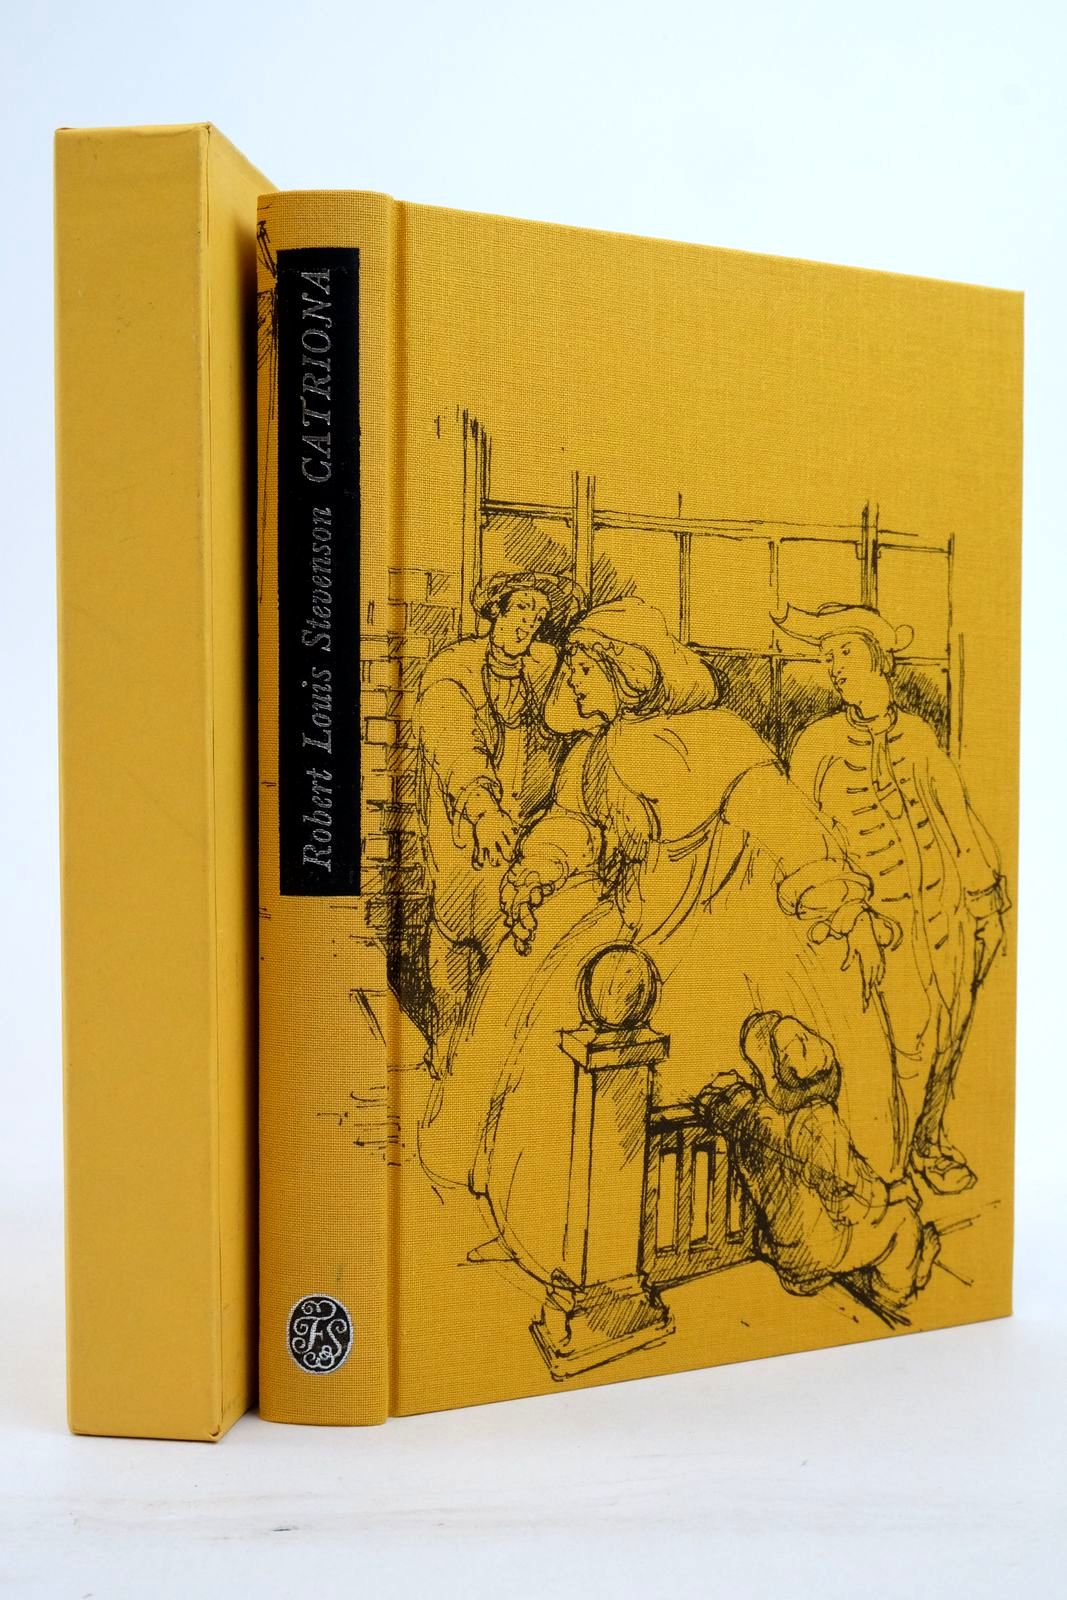 Photo of CATRIONA written by Stevenson, Robert Louis Delaney, Frank illustrated by Newnham, Annie published by Folio Society (STOCK CODE: 2138207)  for sale by Stella & Rose's Books